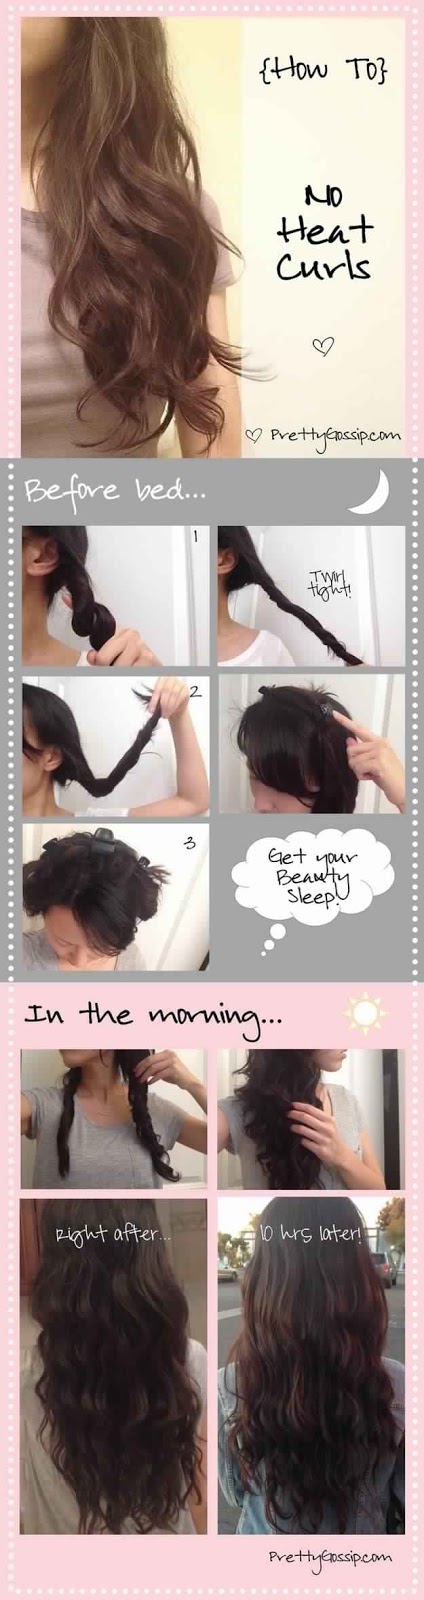 17 Ways To Never Have A Bad Hair Day Again